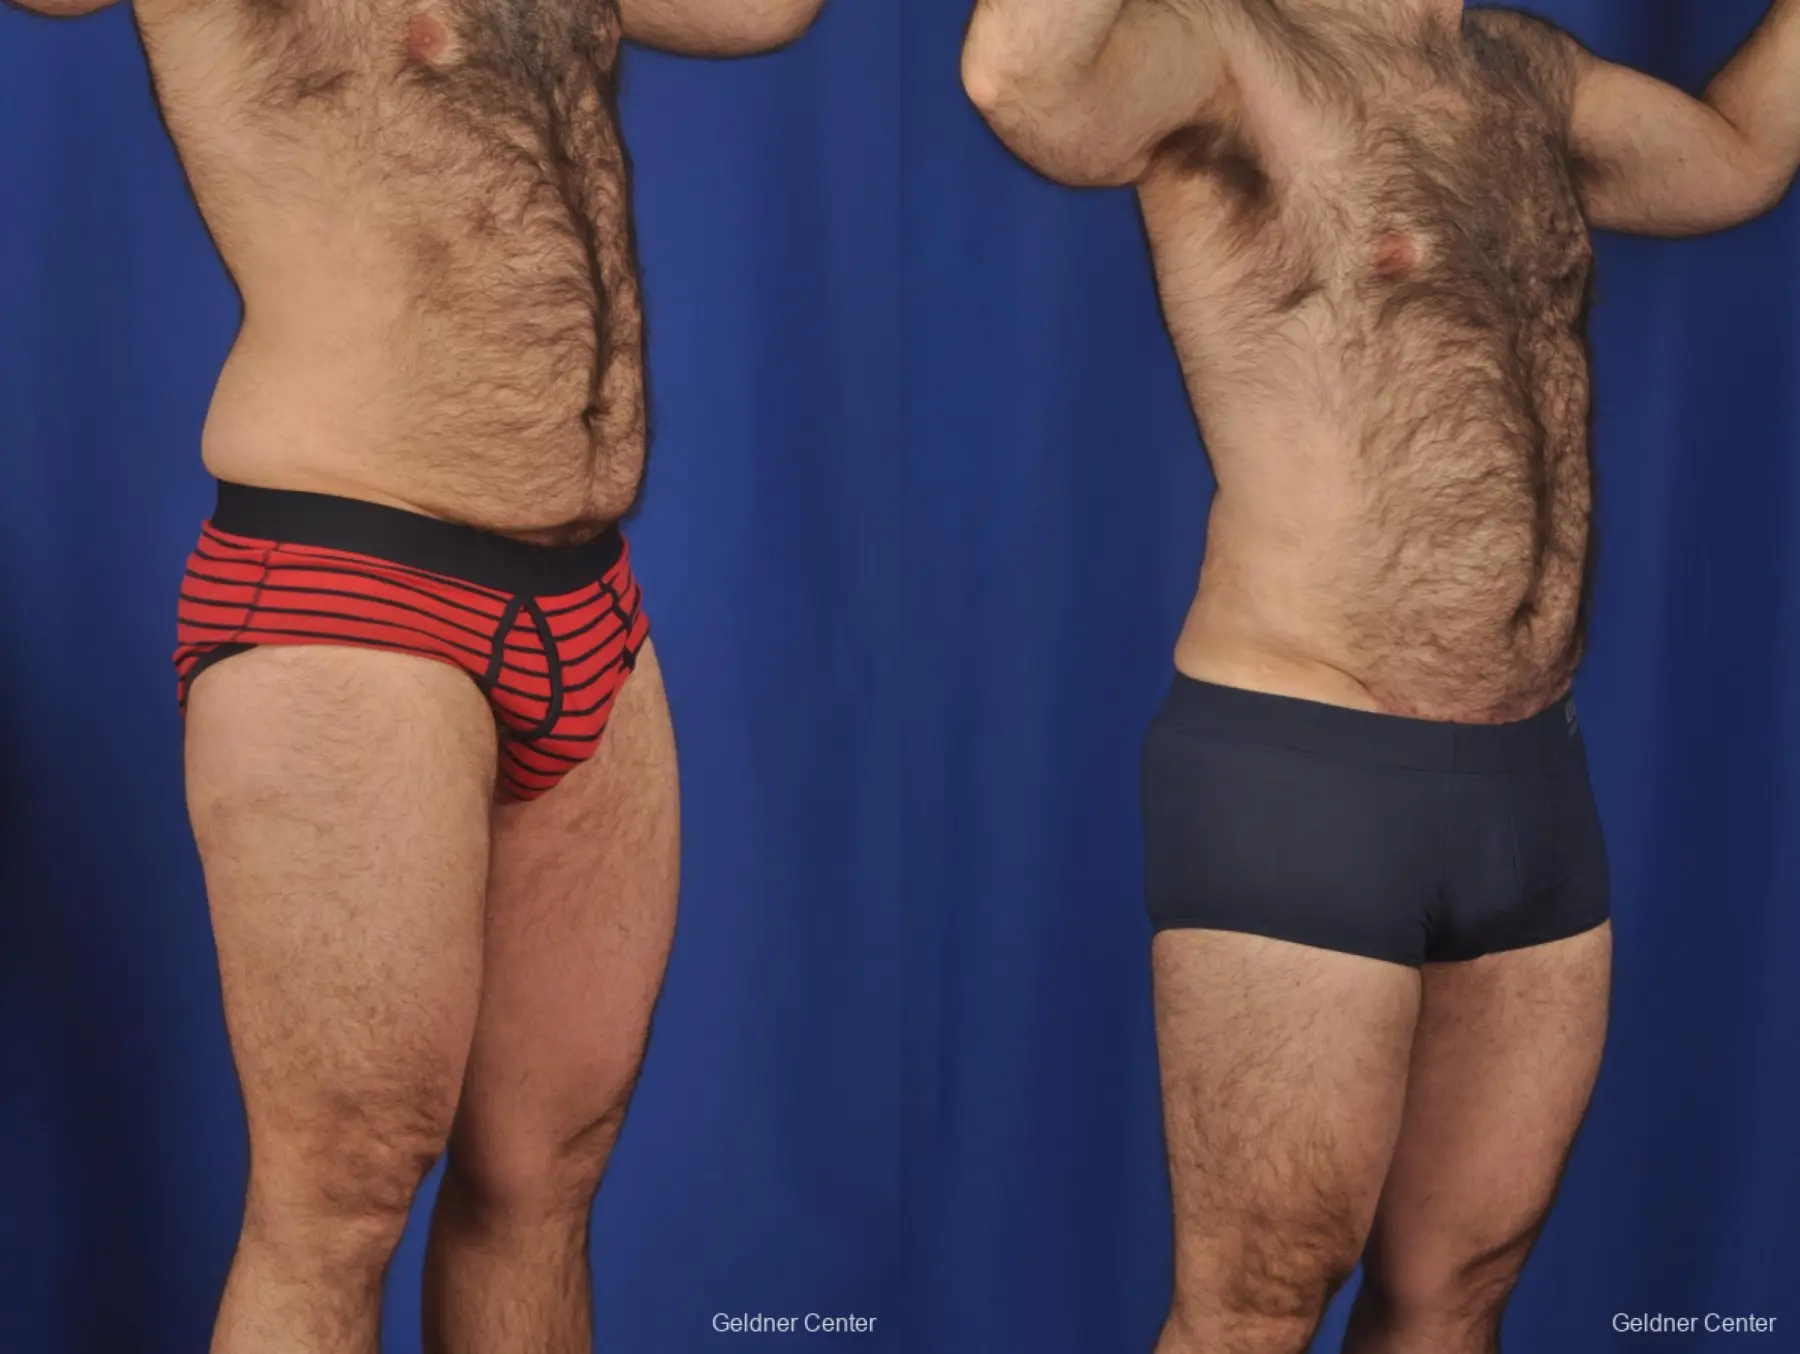 Abdominoplasty For Men: Patient 1 - Before and After 2